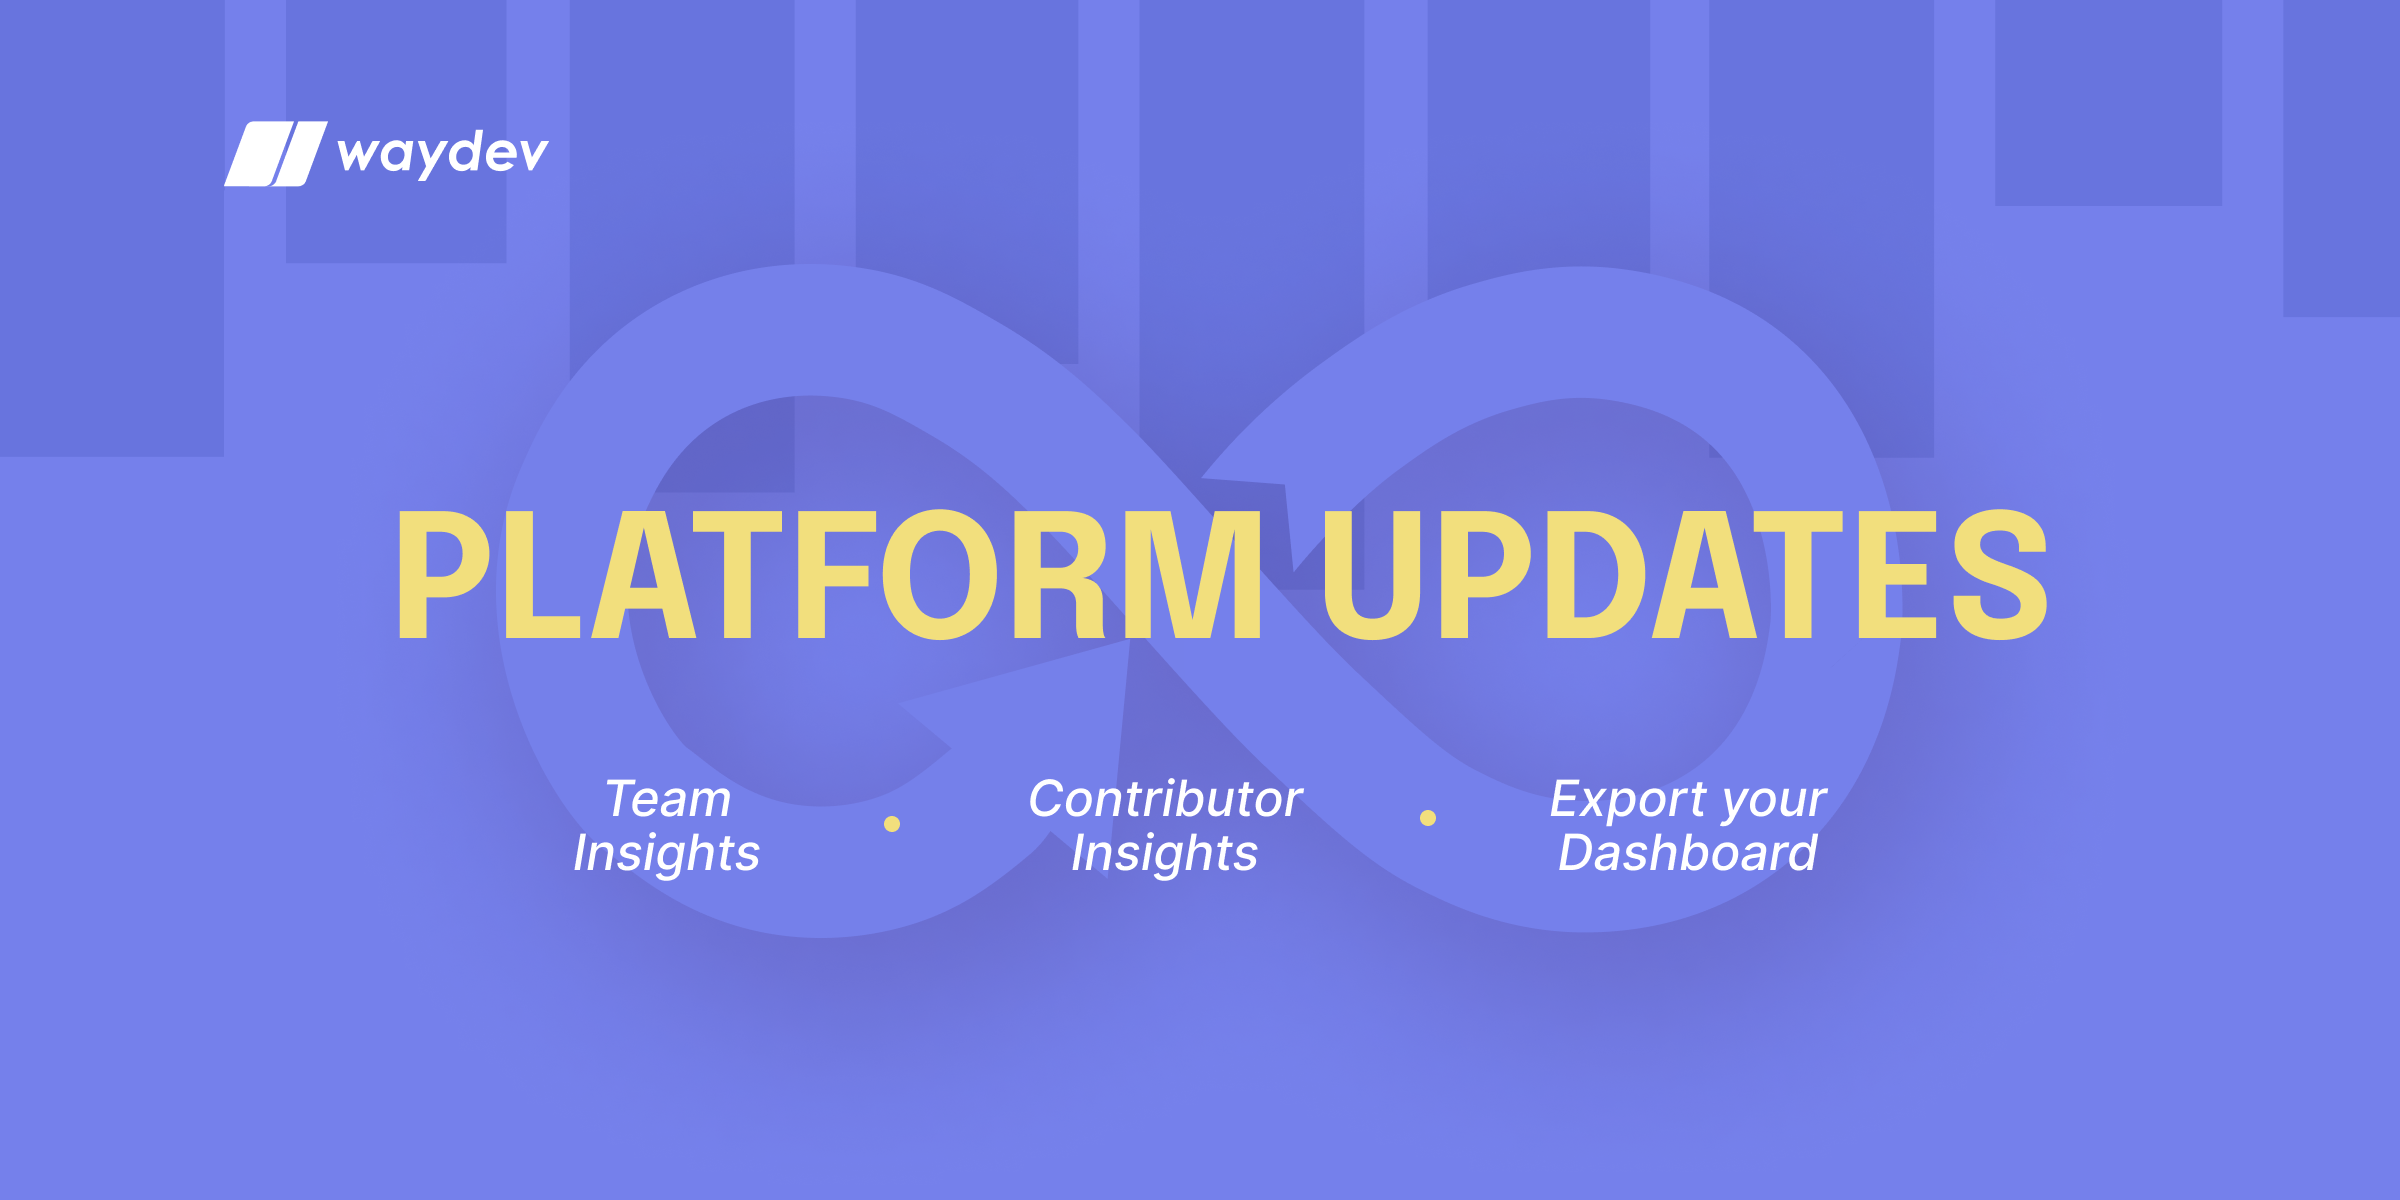 Platform Updates: Team Insights, Contributor Insights, and Exporting Capabilities